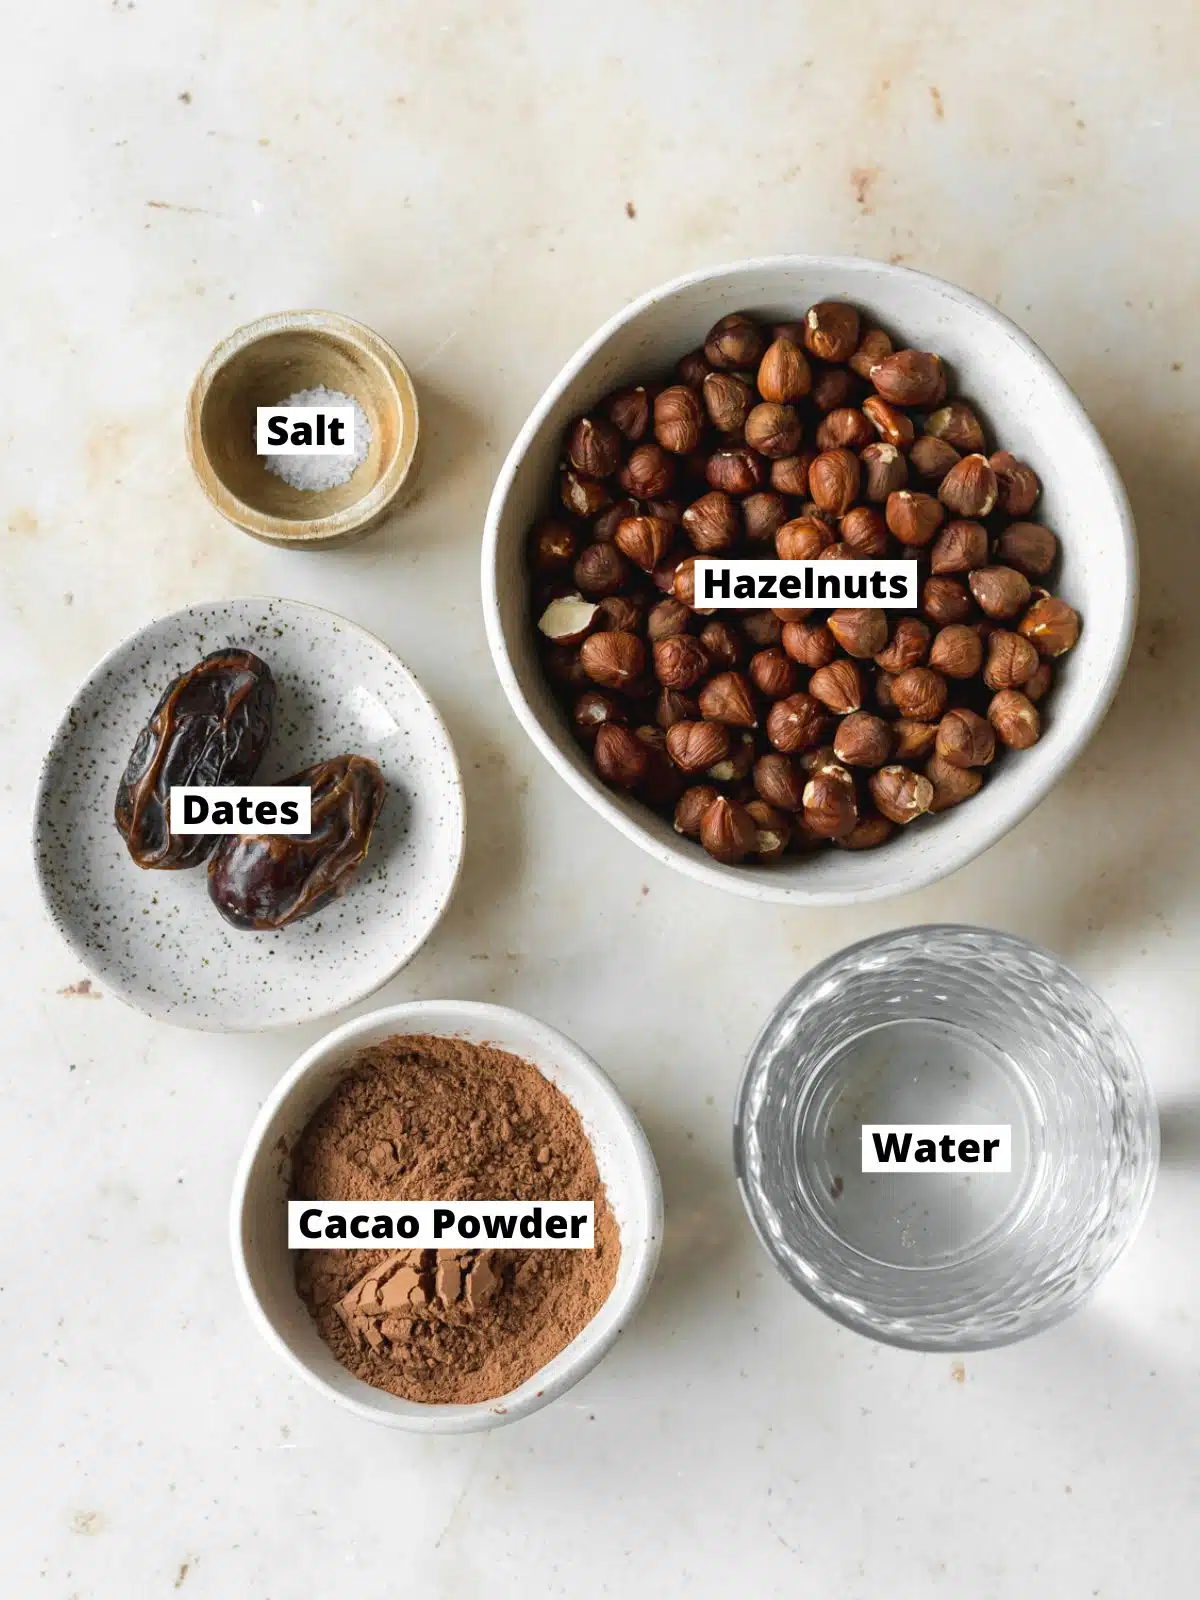 ingredients for hazelnut milk measured out in bowls on a marble surface.